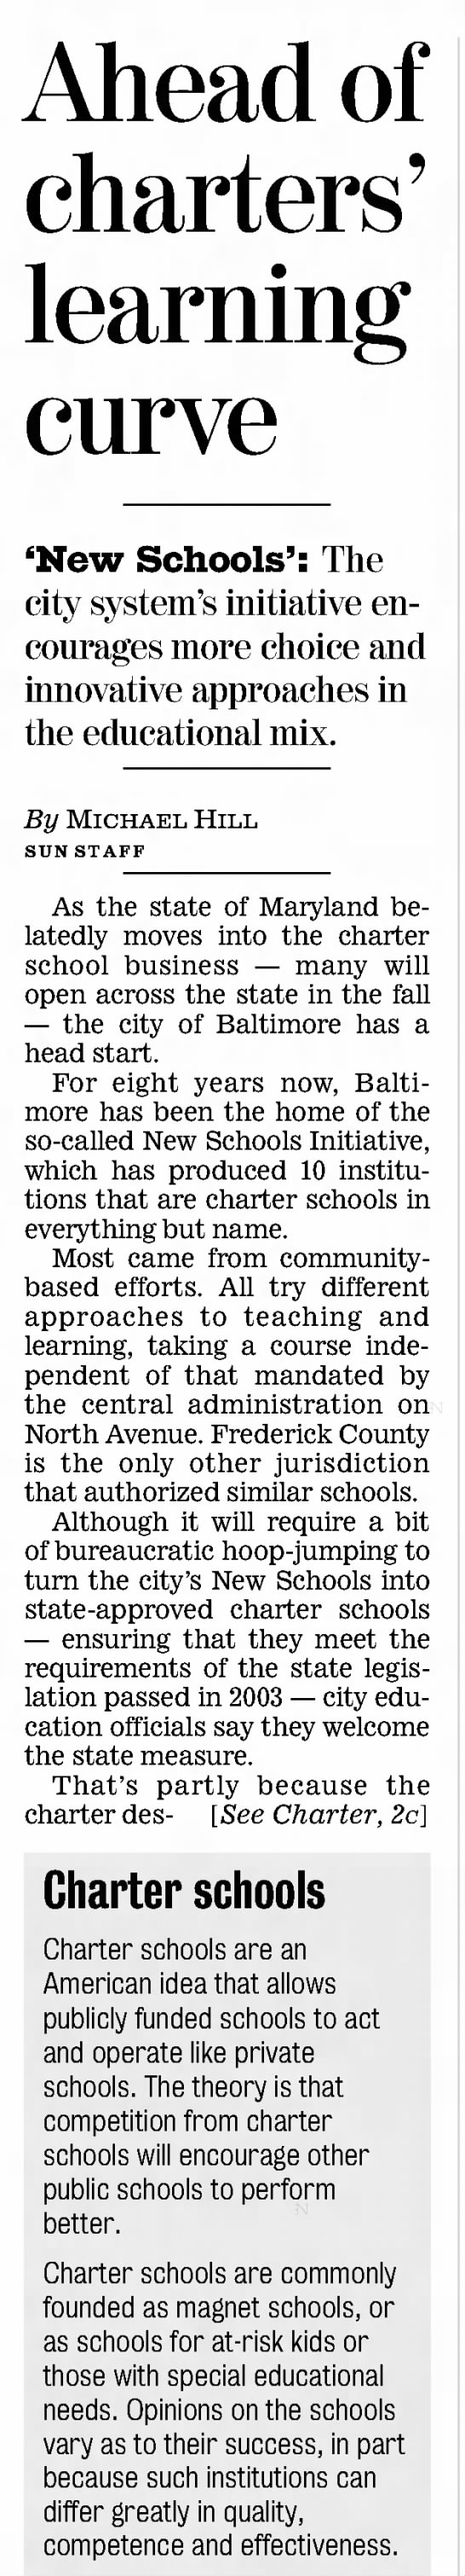 Ahead of charters' learning curve - 